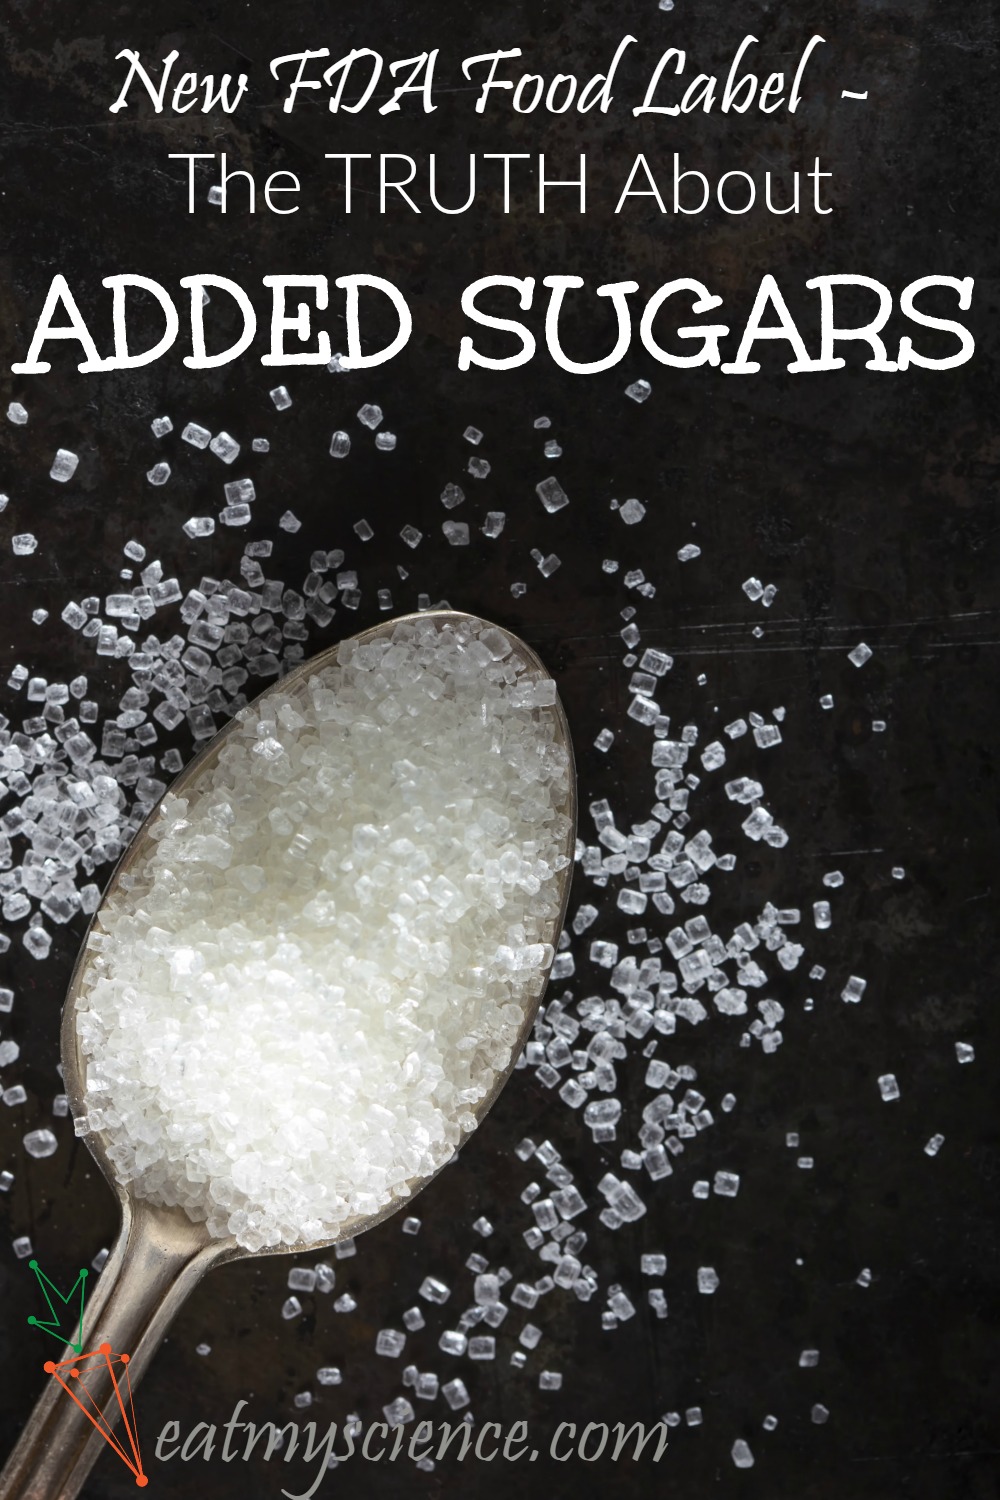 New FDA Food Label - The Truth About Added Sugars